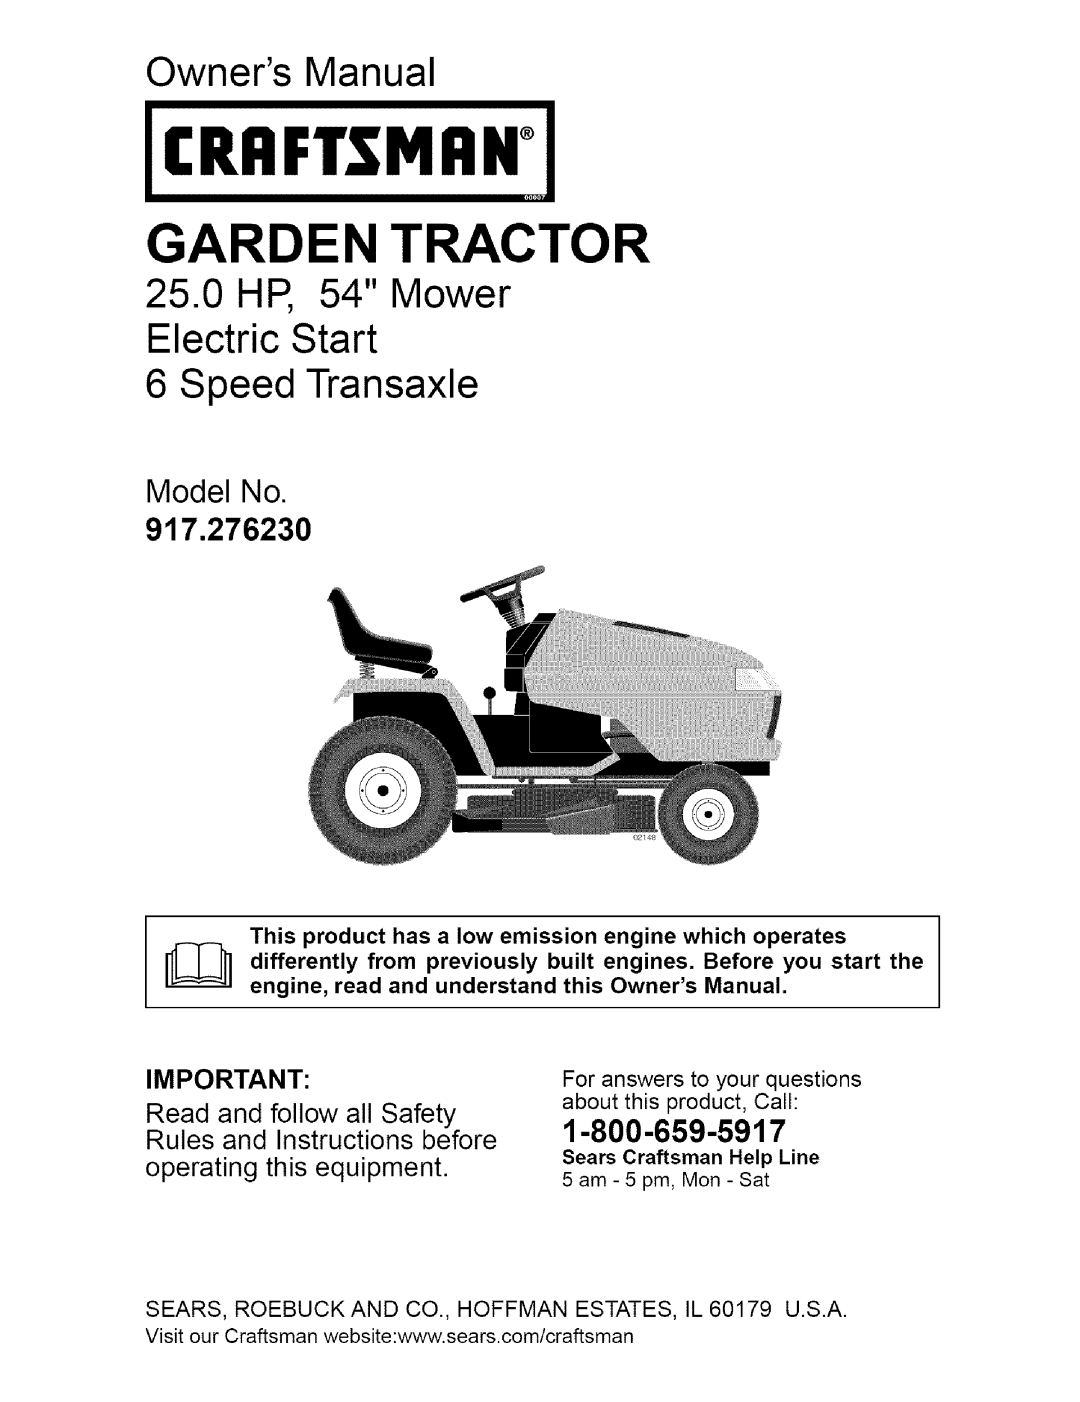 Craftsman owner manual Model No, 917.276230, 1-800-659-5917, operating this equipment, Criiftsmiih, Garden Tractor 